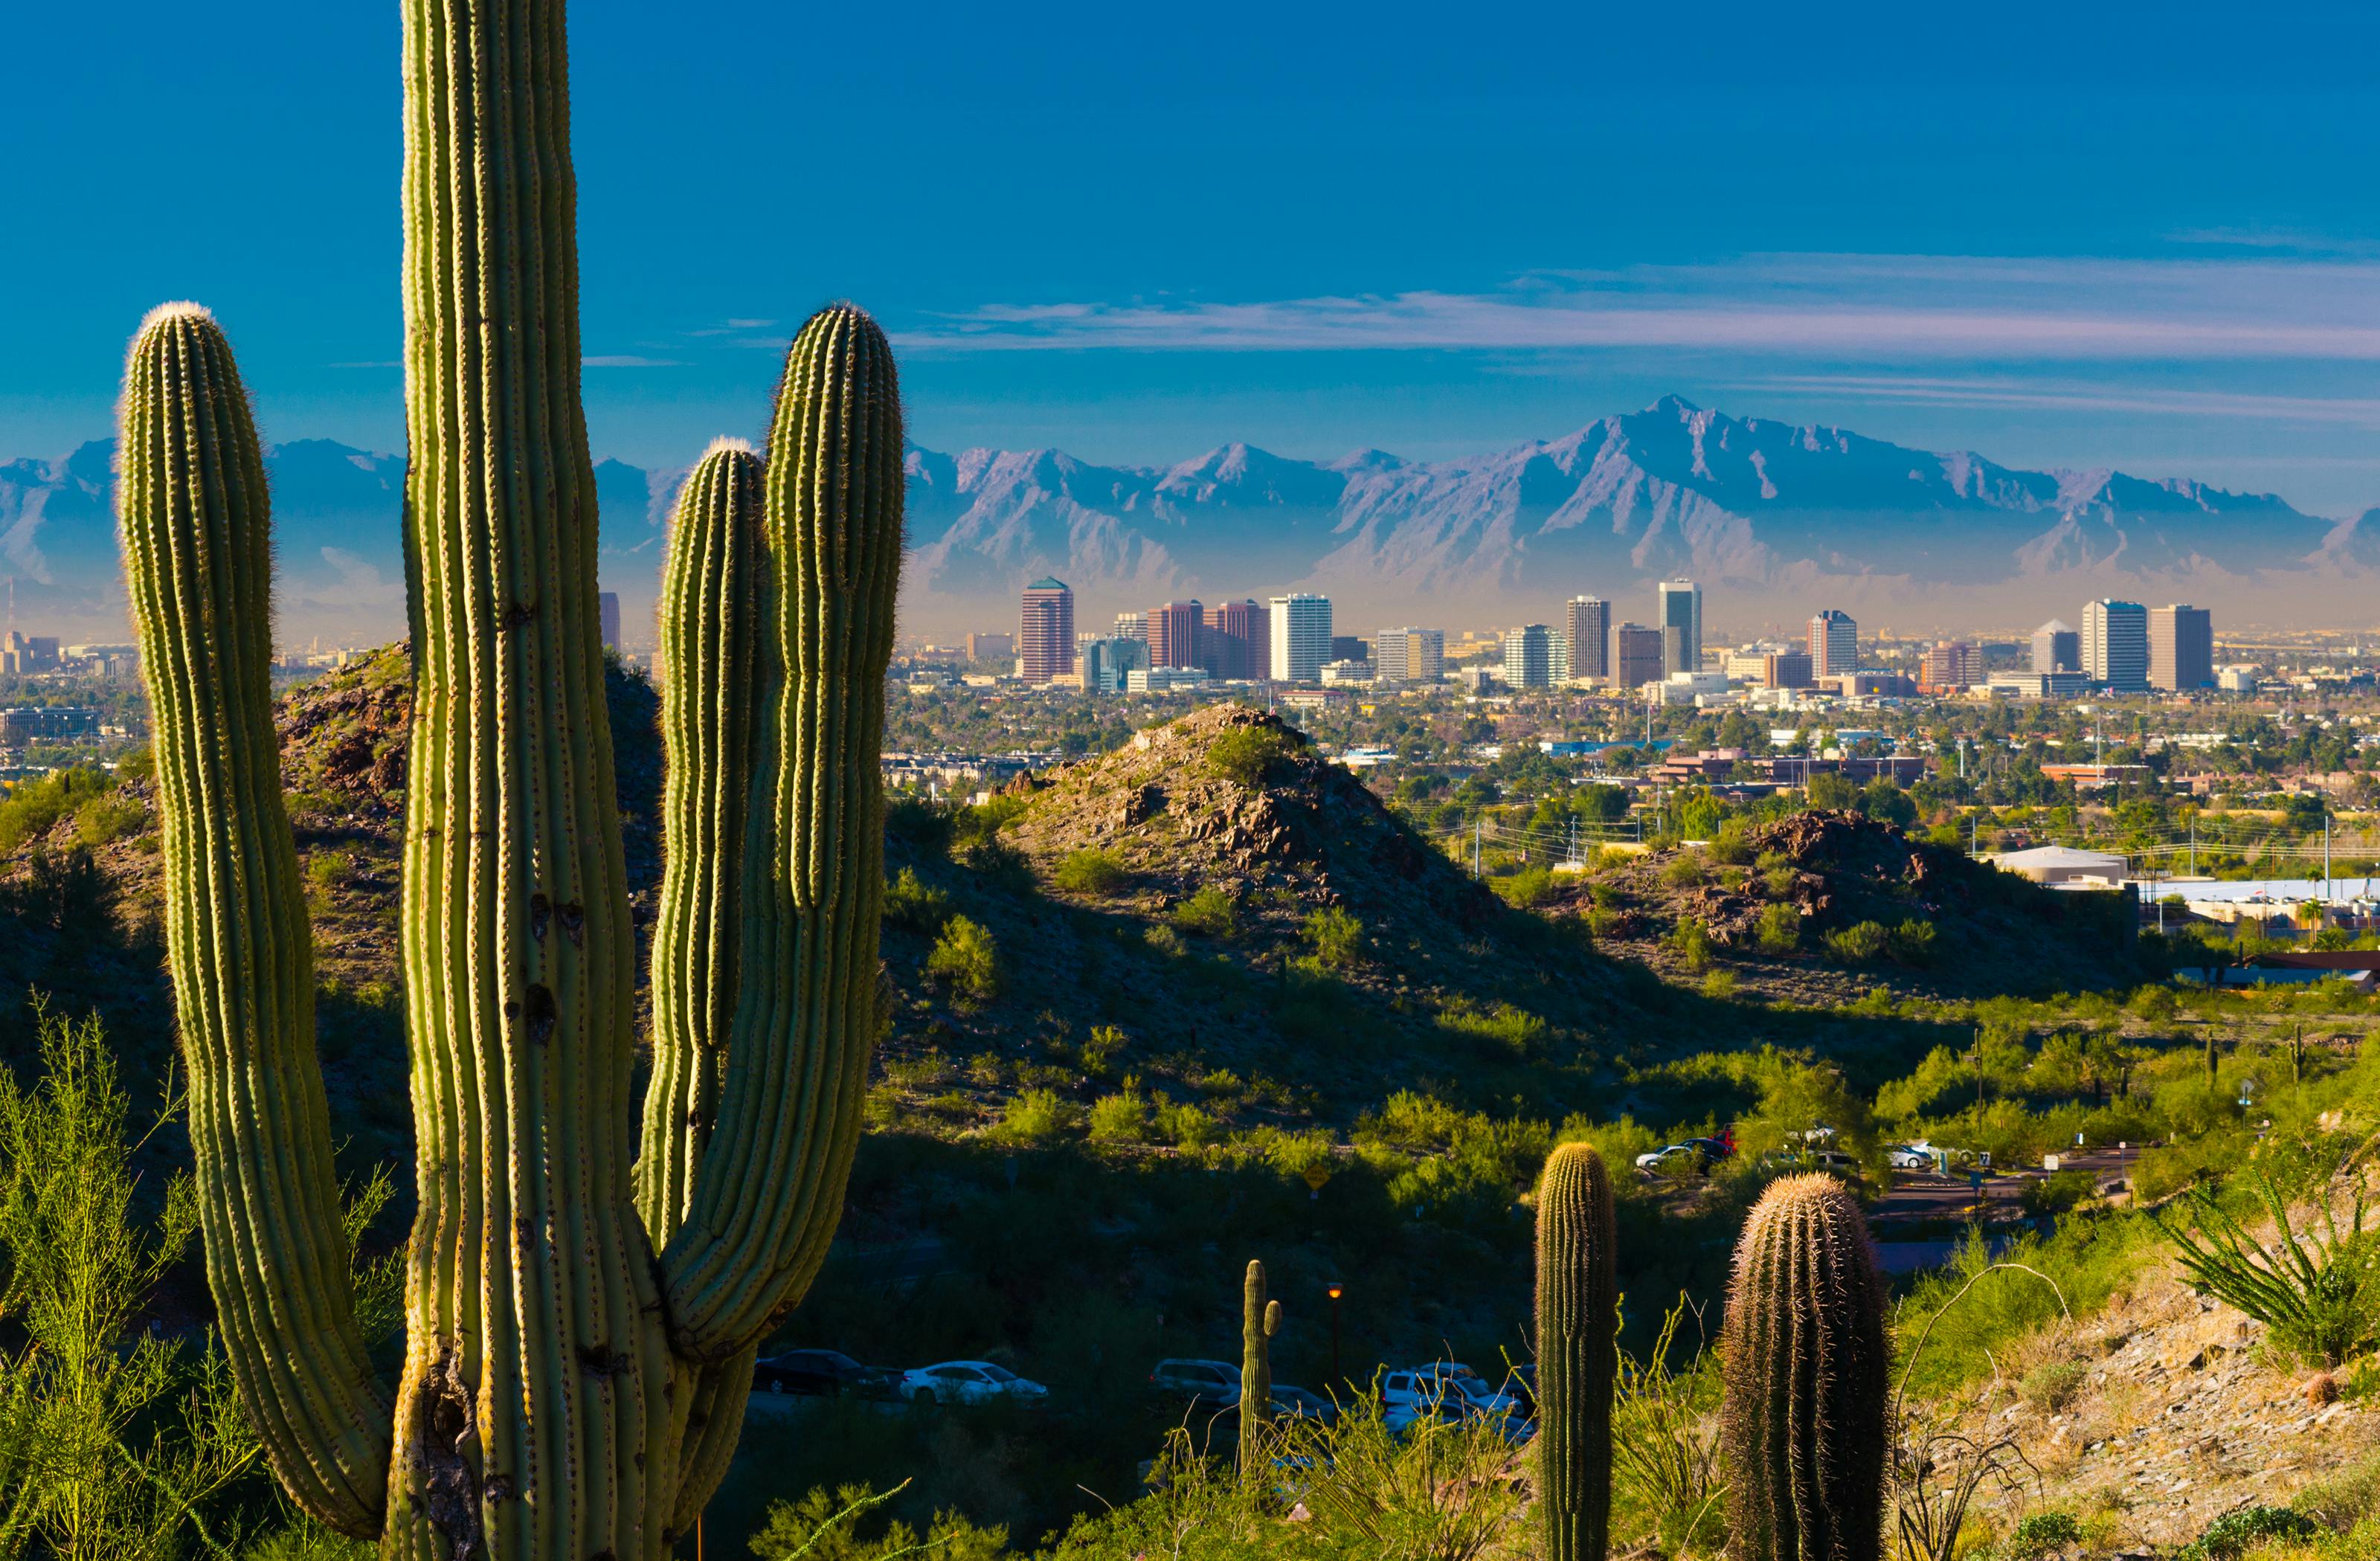 Midtown Phoenix skyline with several cacti and desert hills in the foreground.